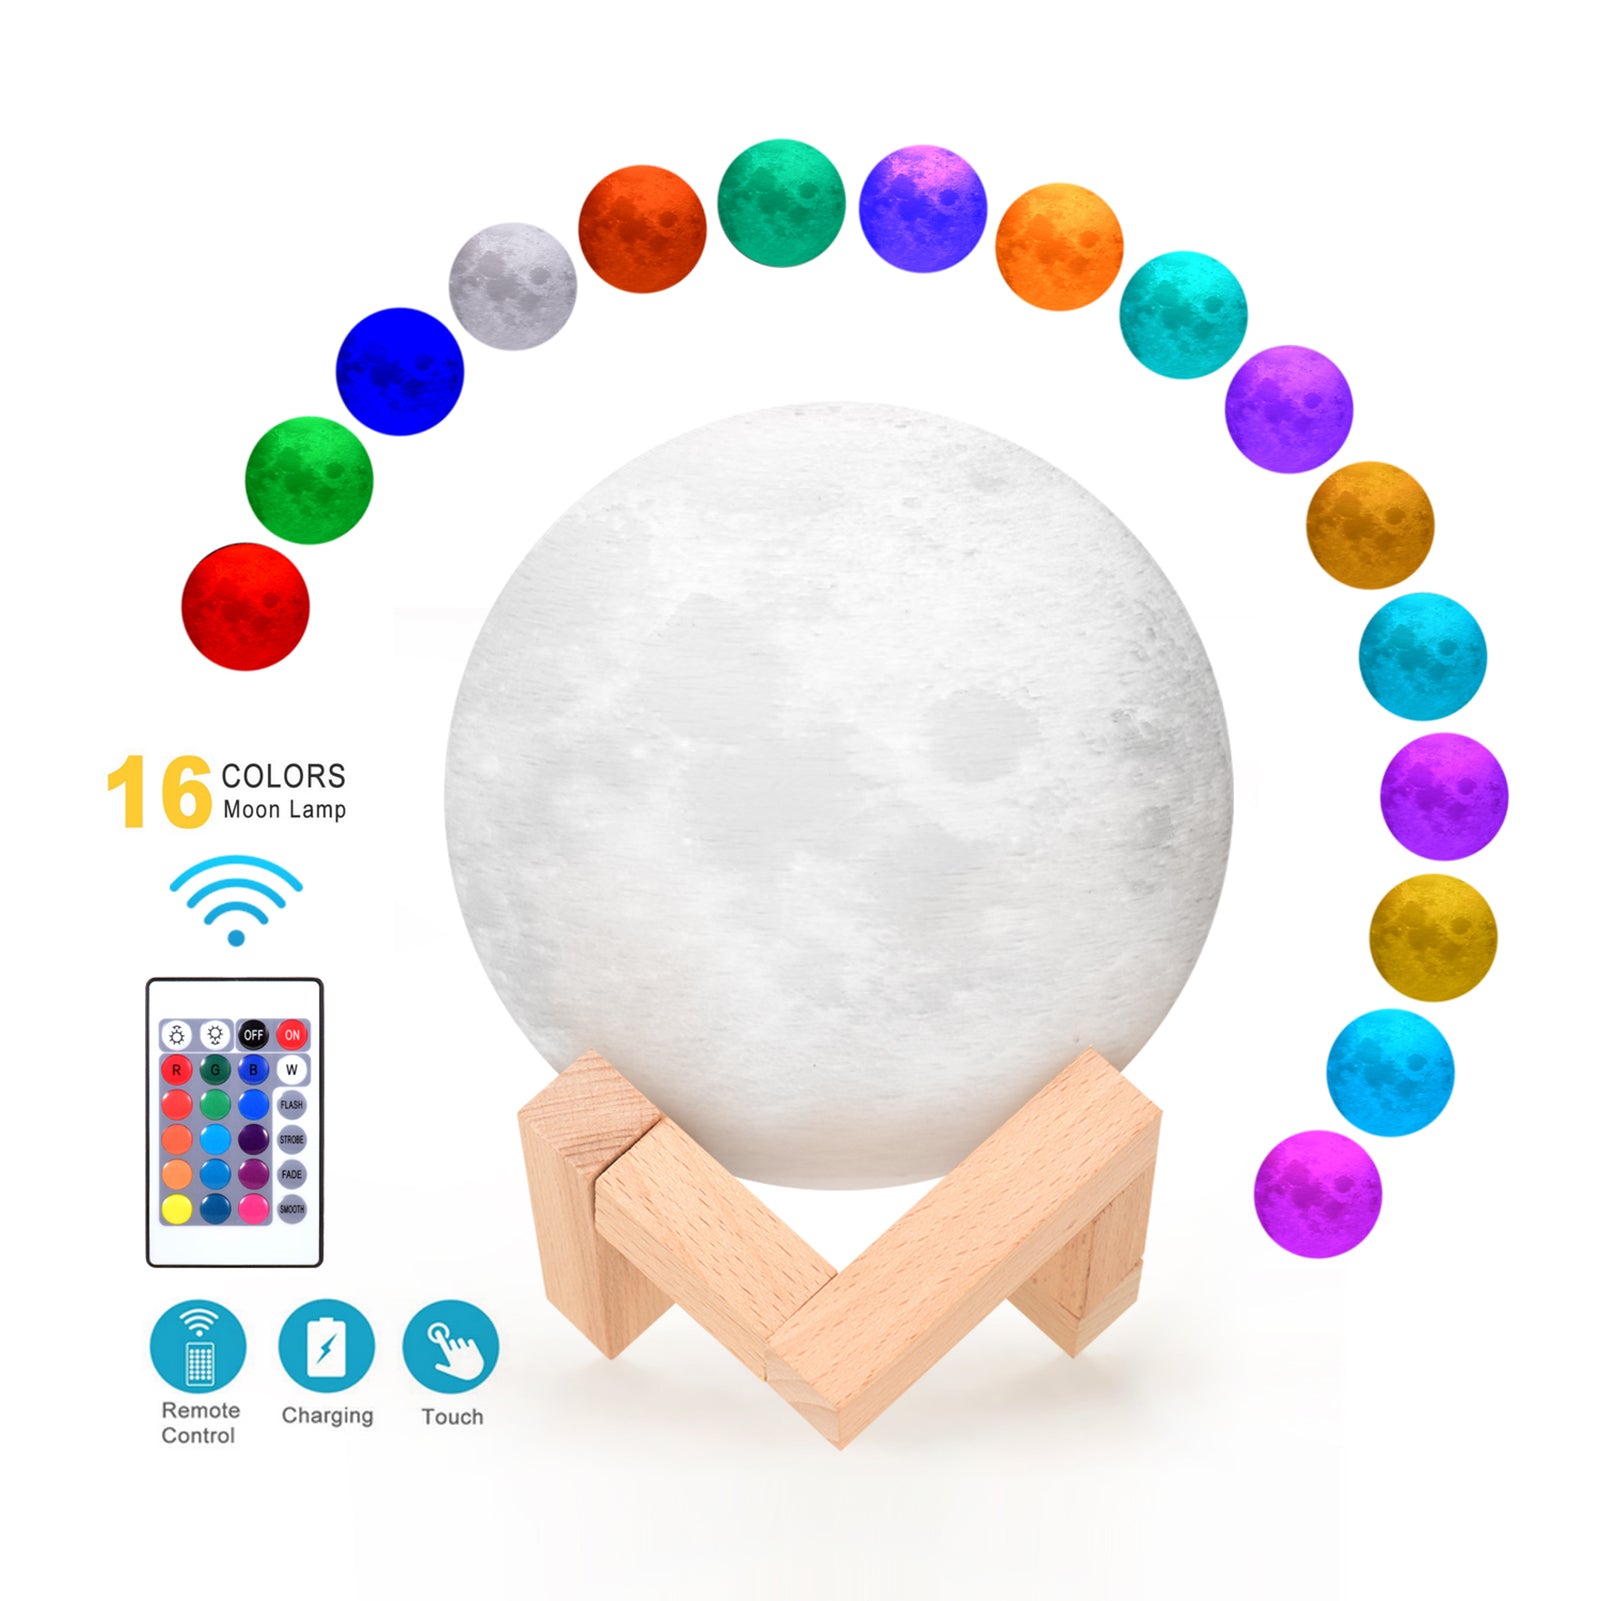 16 Colours Creative Moon Lamp 3D Printed Lunar Lamp LED Night Light 12cm with Remote Control